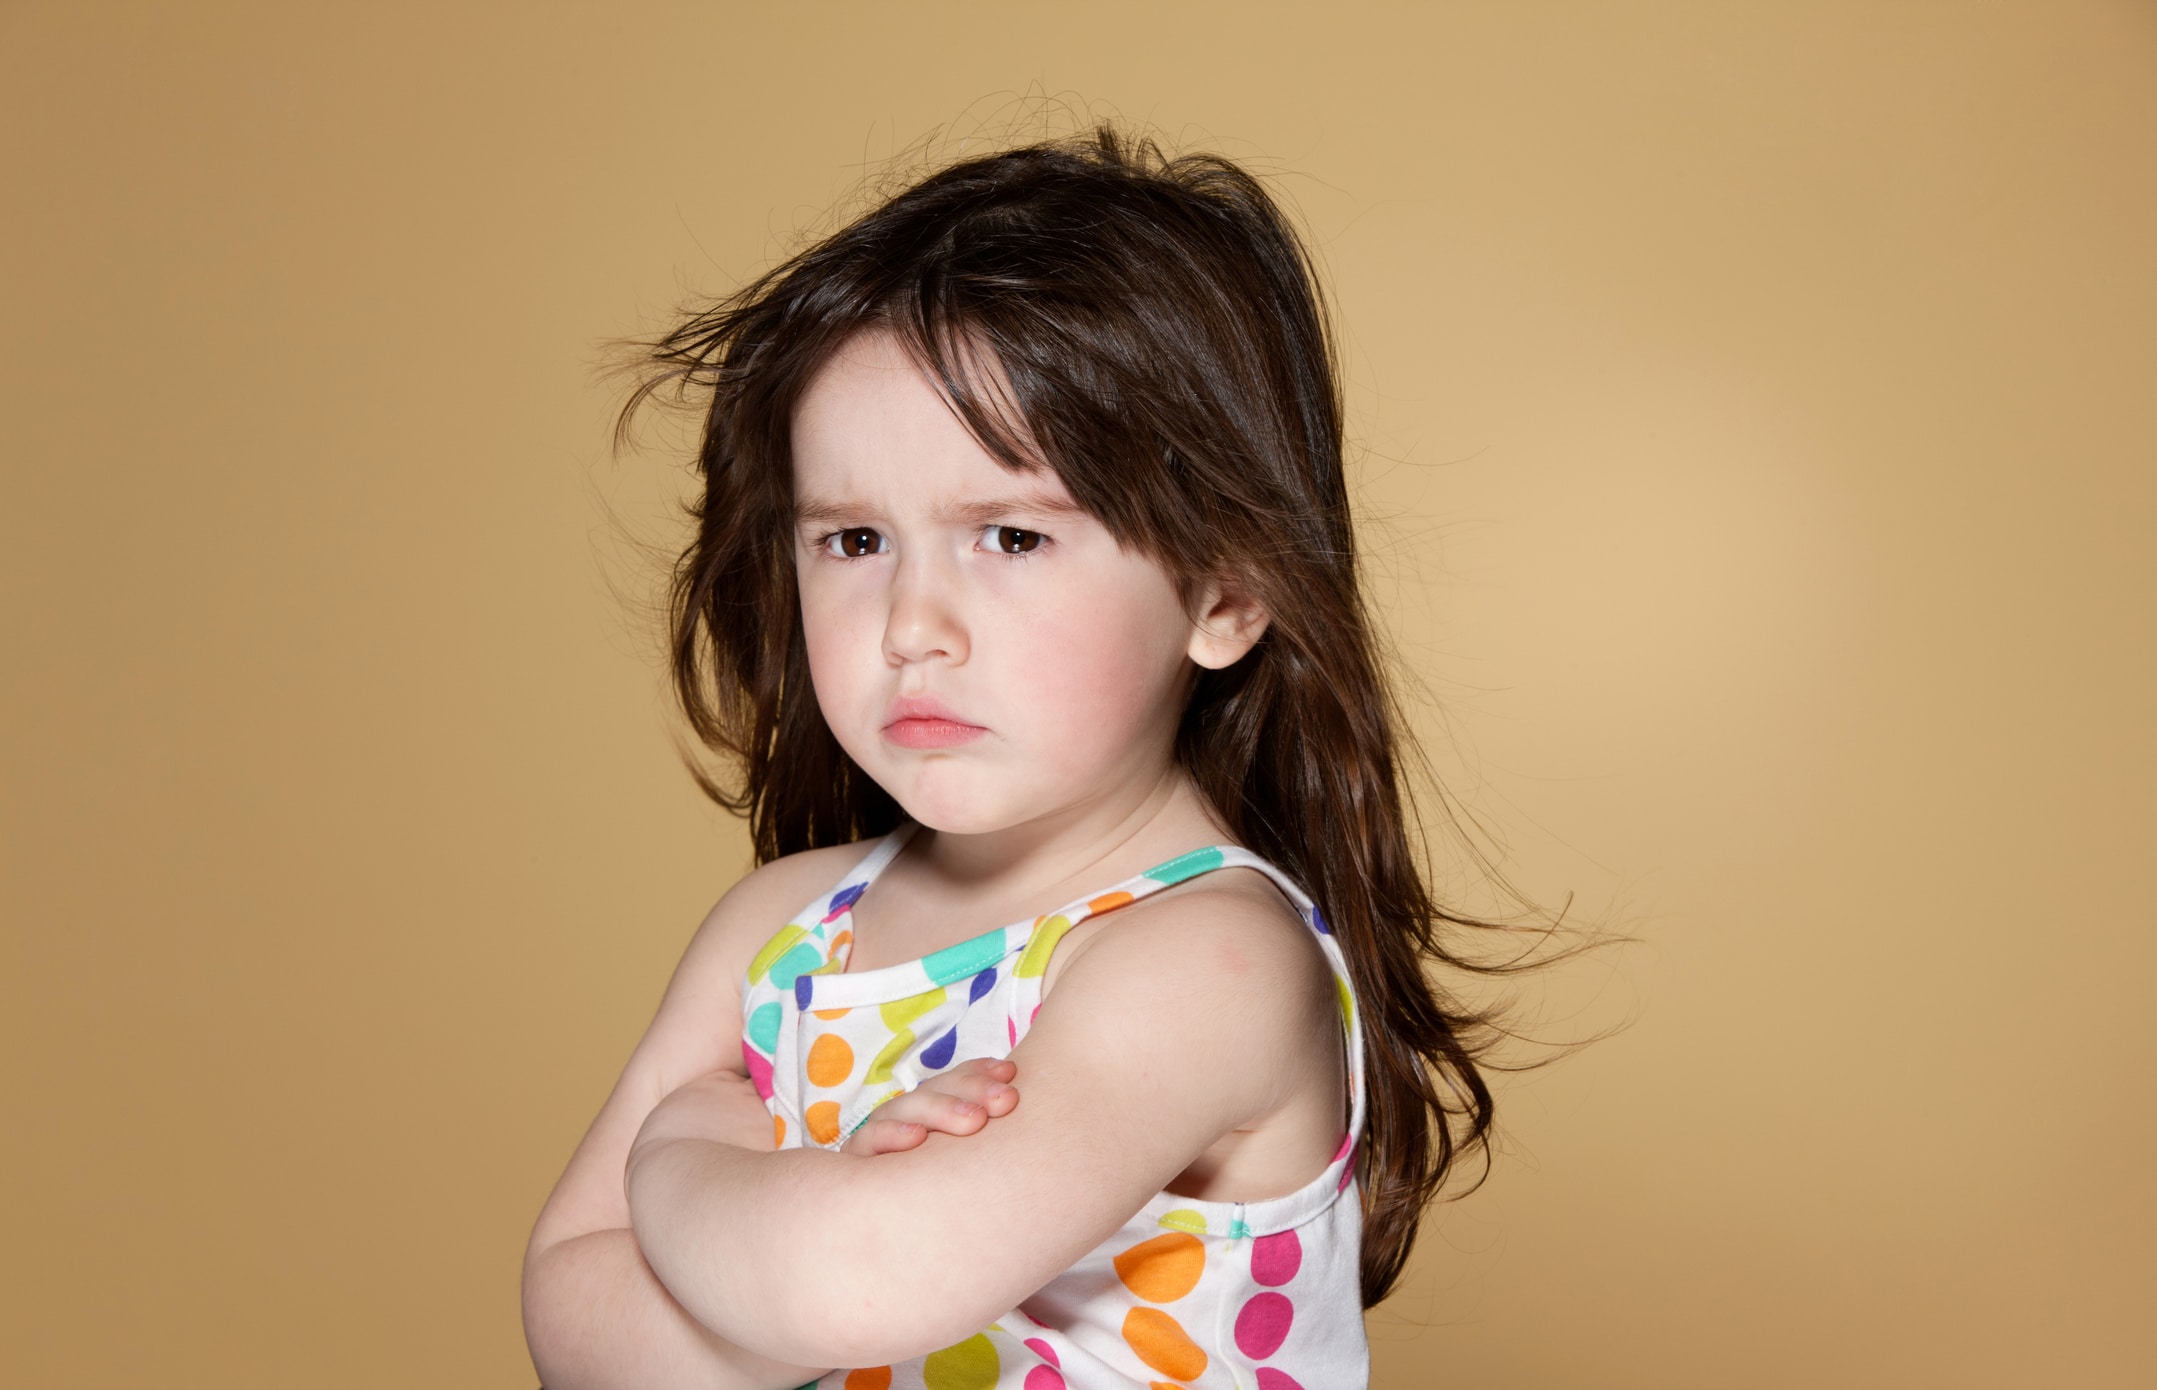 Image of an angry toddler